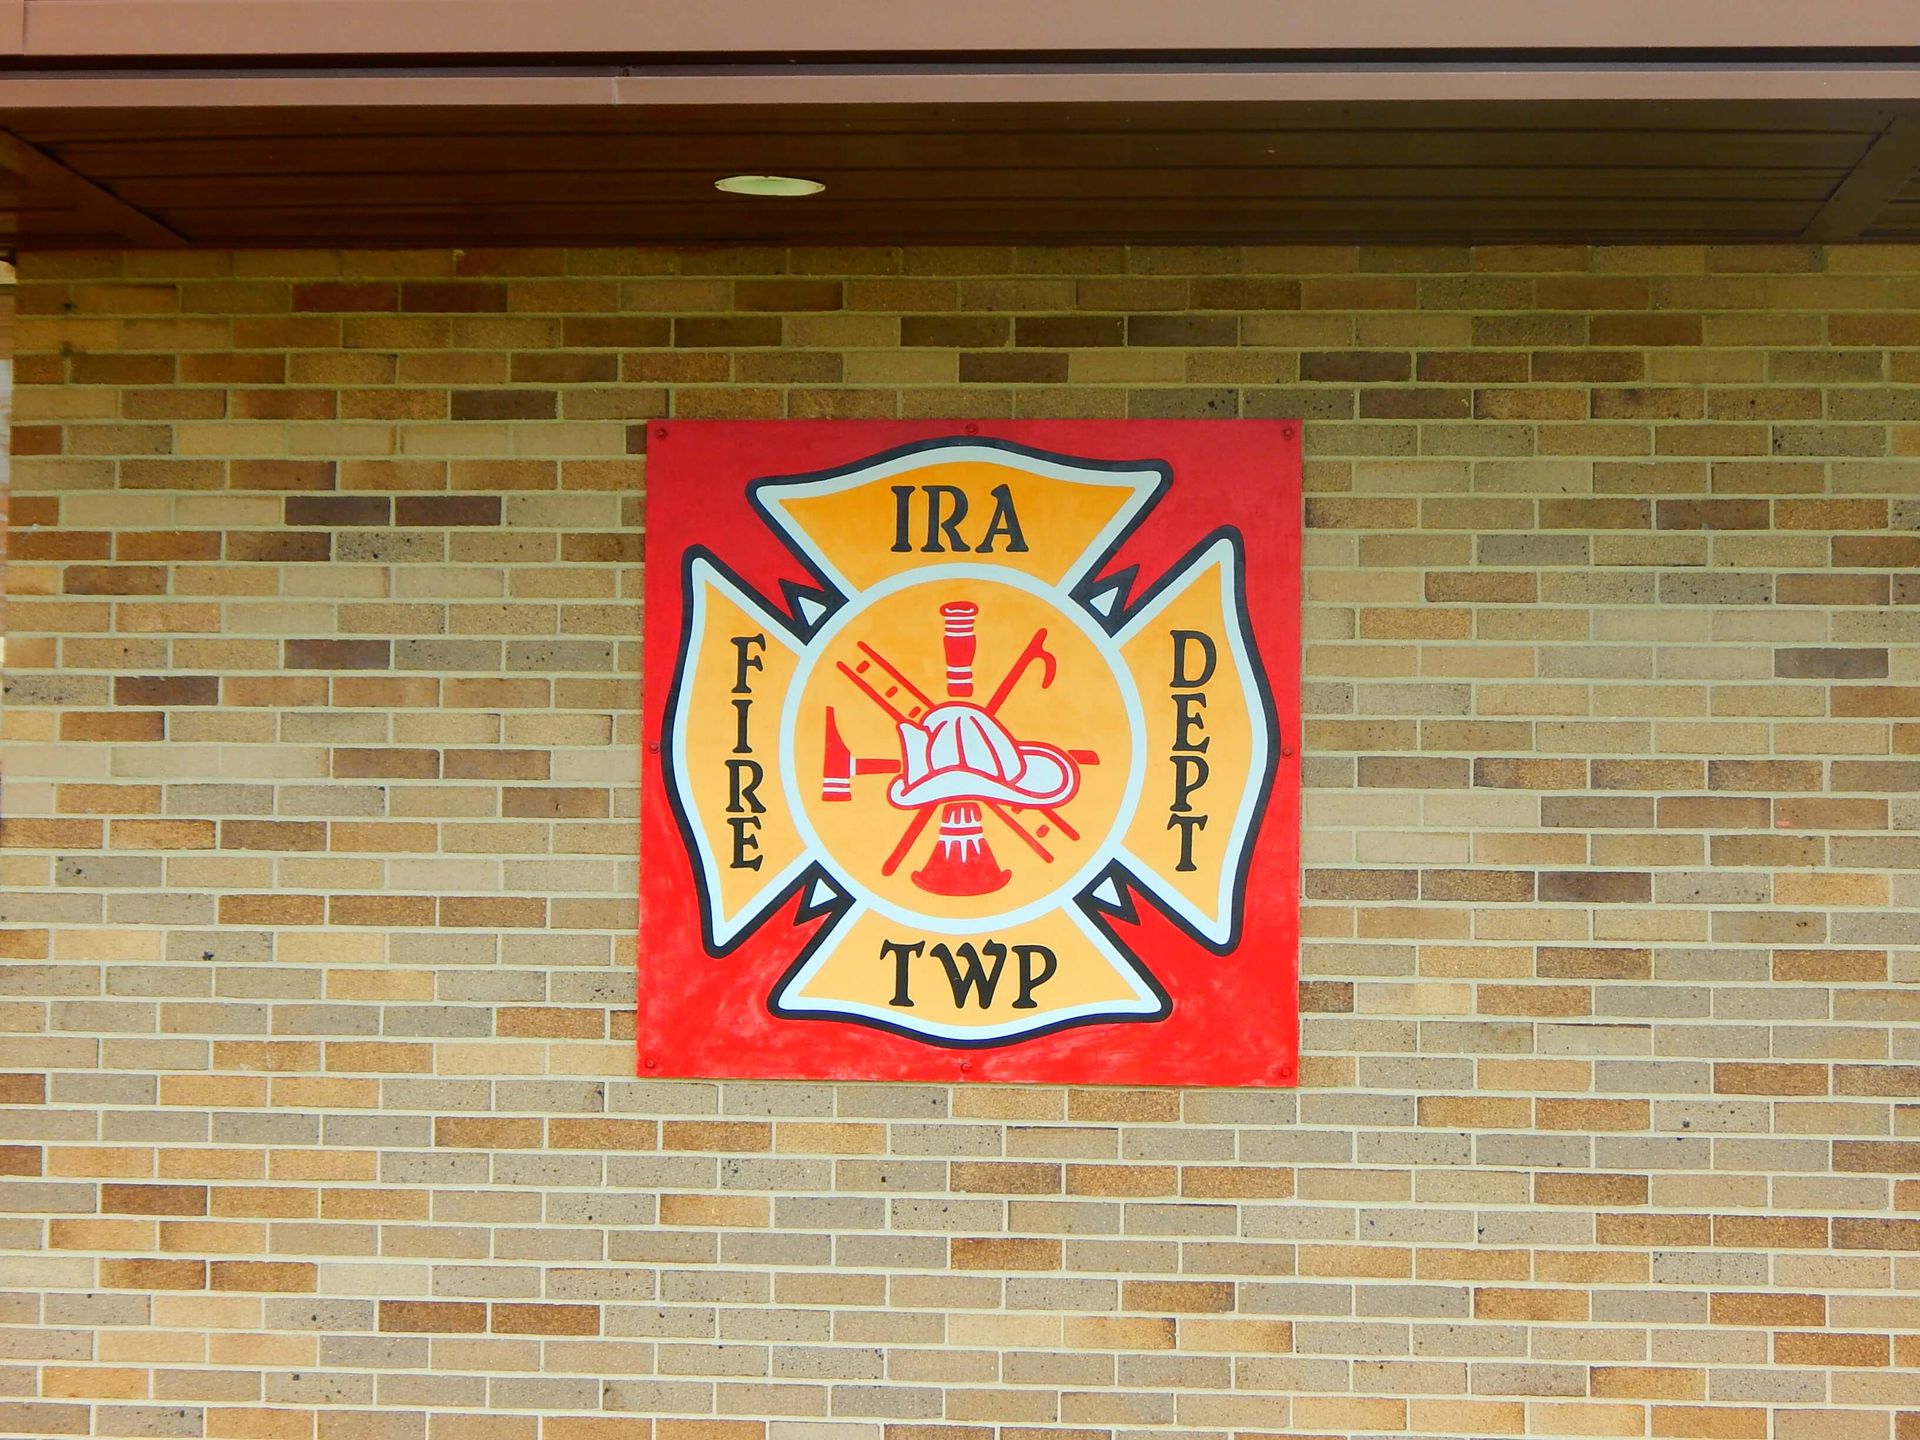 A sign on a brick wall says Ira Township Fire Department.